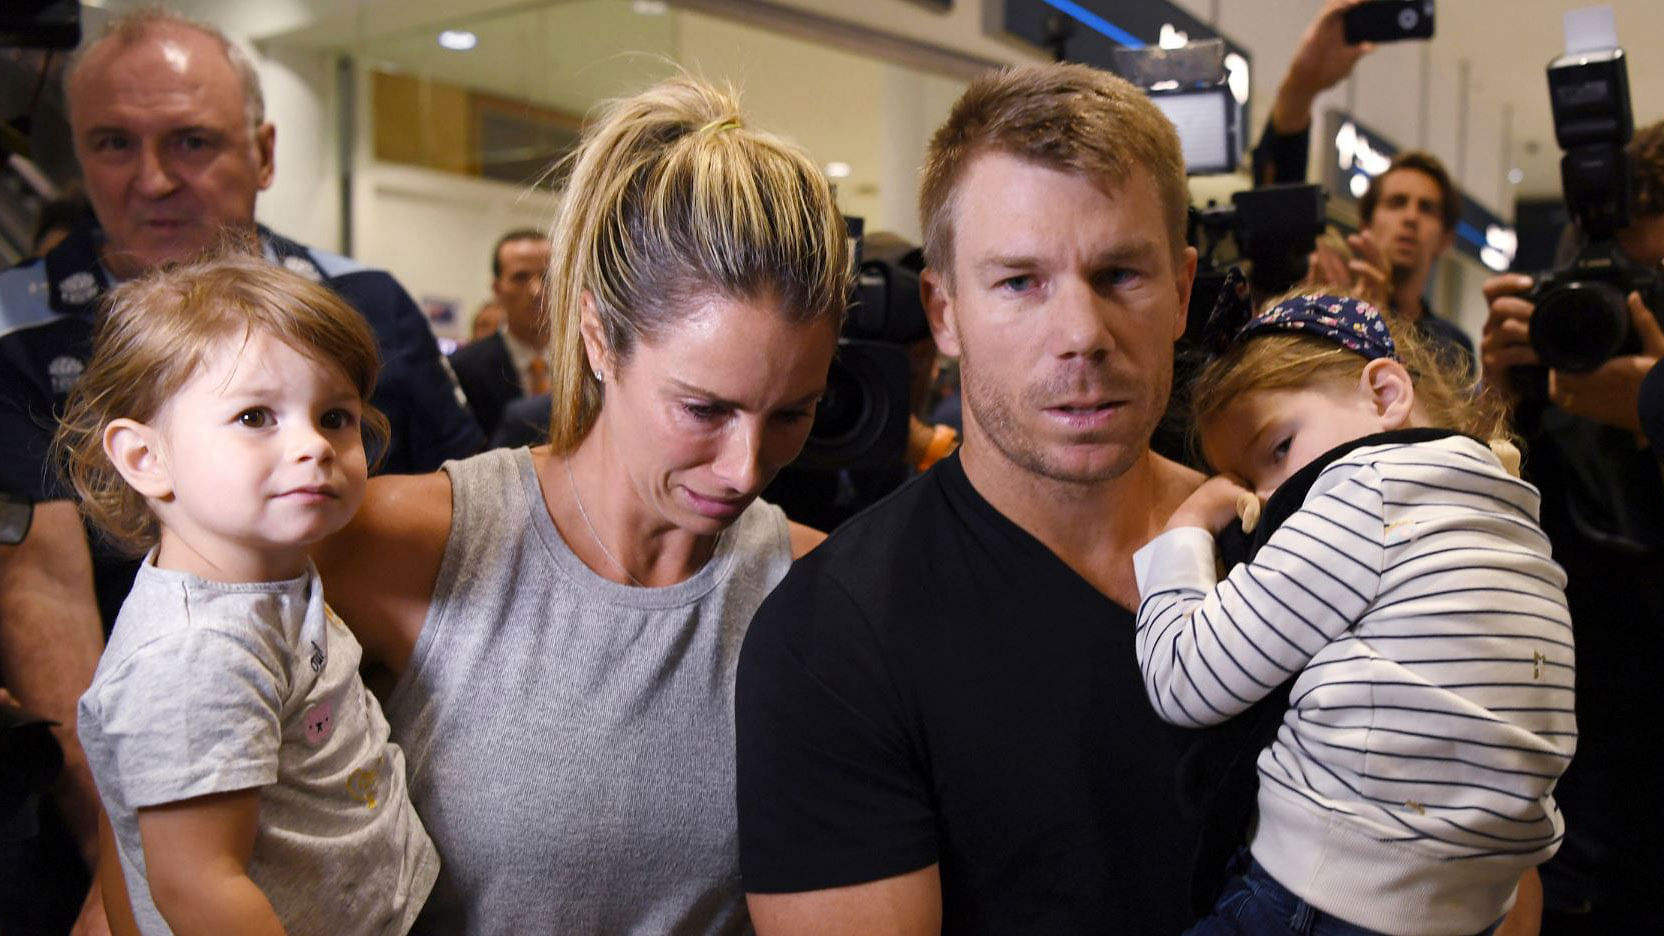 David Warner and his wife Candice at the Sydney airport with their daughters.